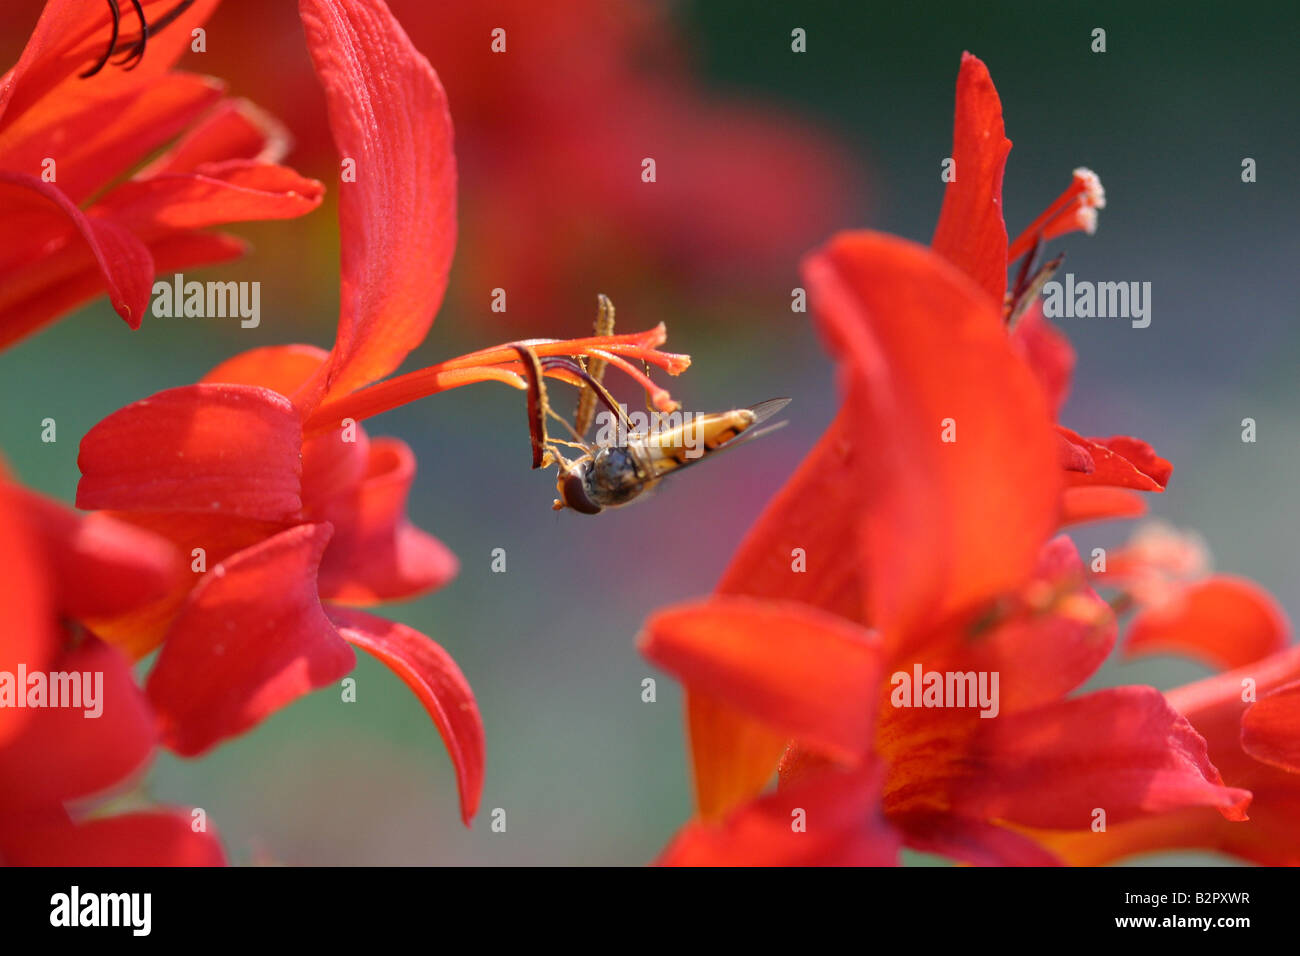 Hoverfly on red flowers Stock Photo